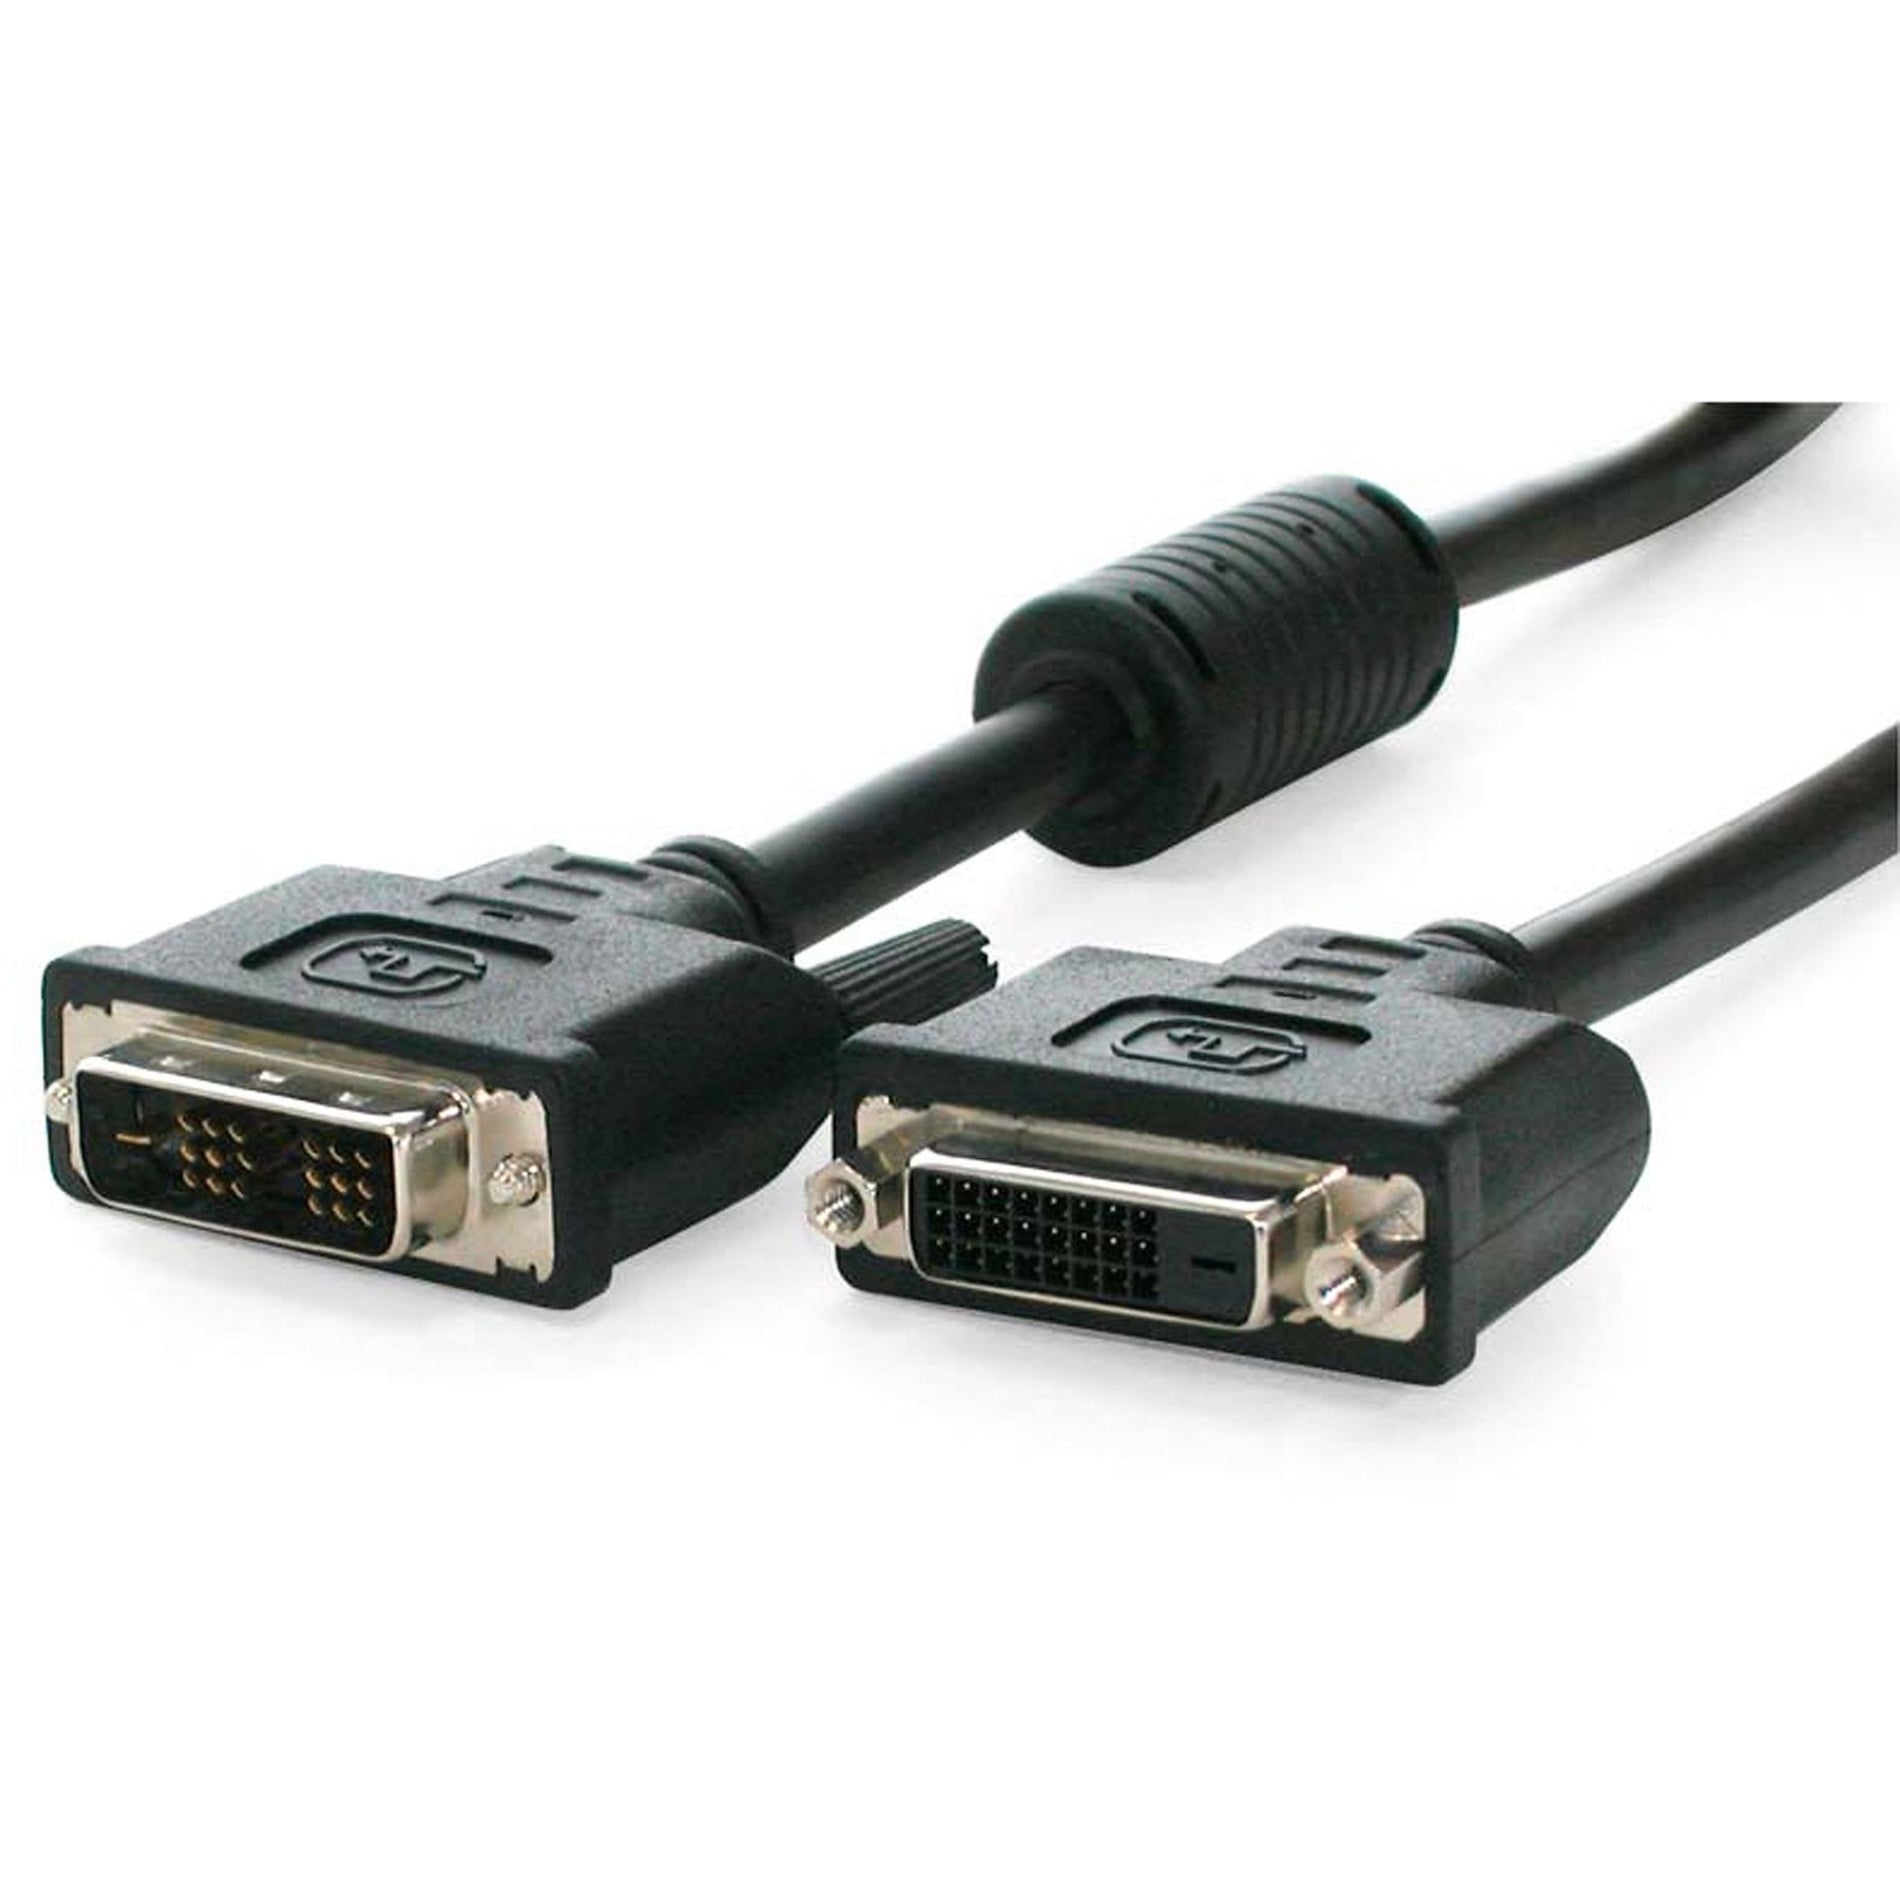 StarTech.com DVIDSMF15 15 ft DVI-D Single Link Monitor Extension Cable - M/F, Strain Relief, Molded, 5 Gbit/s Data Transfer Rate [Discontinued]